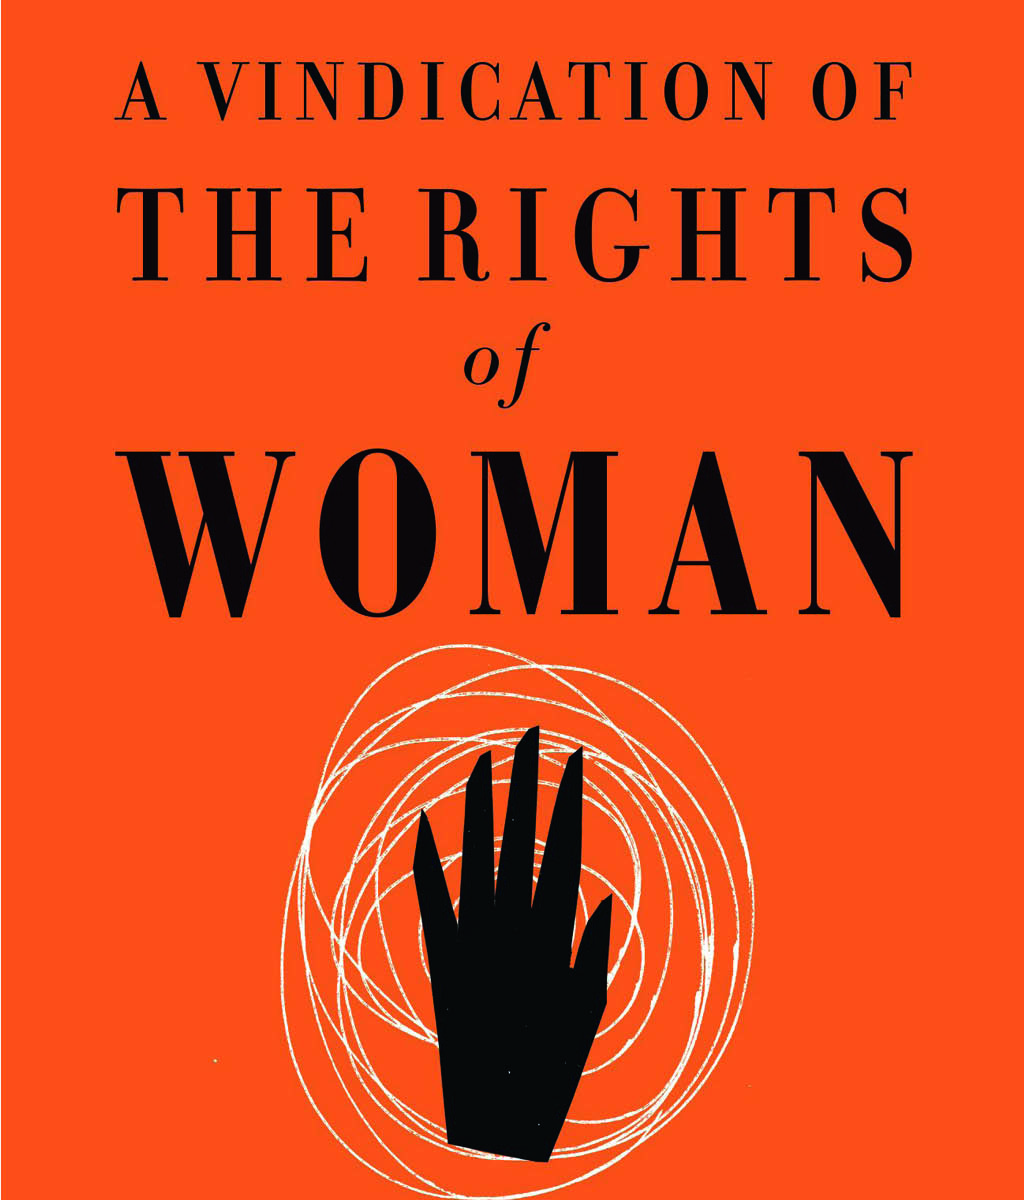 The Vindication of the Rights of Woman by Mary Wollstonecraft